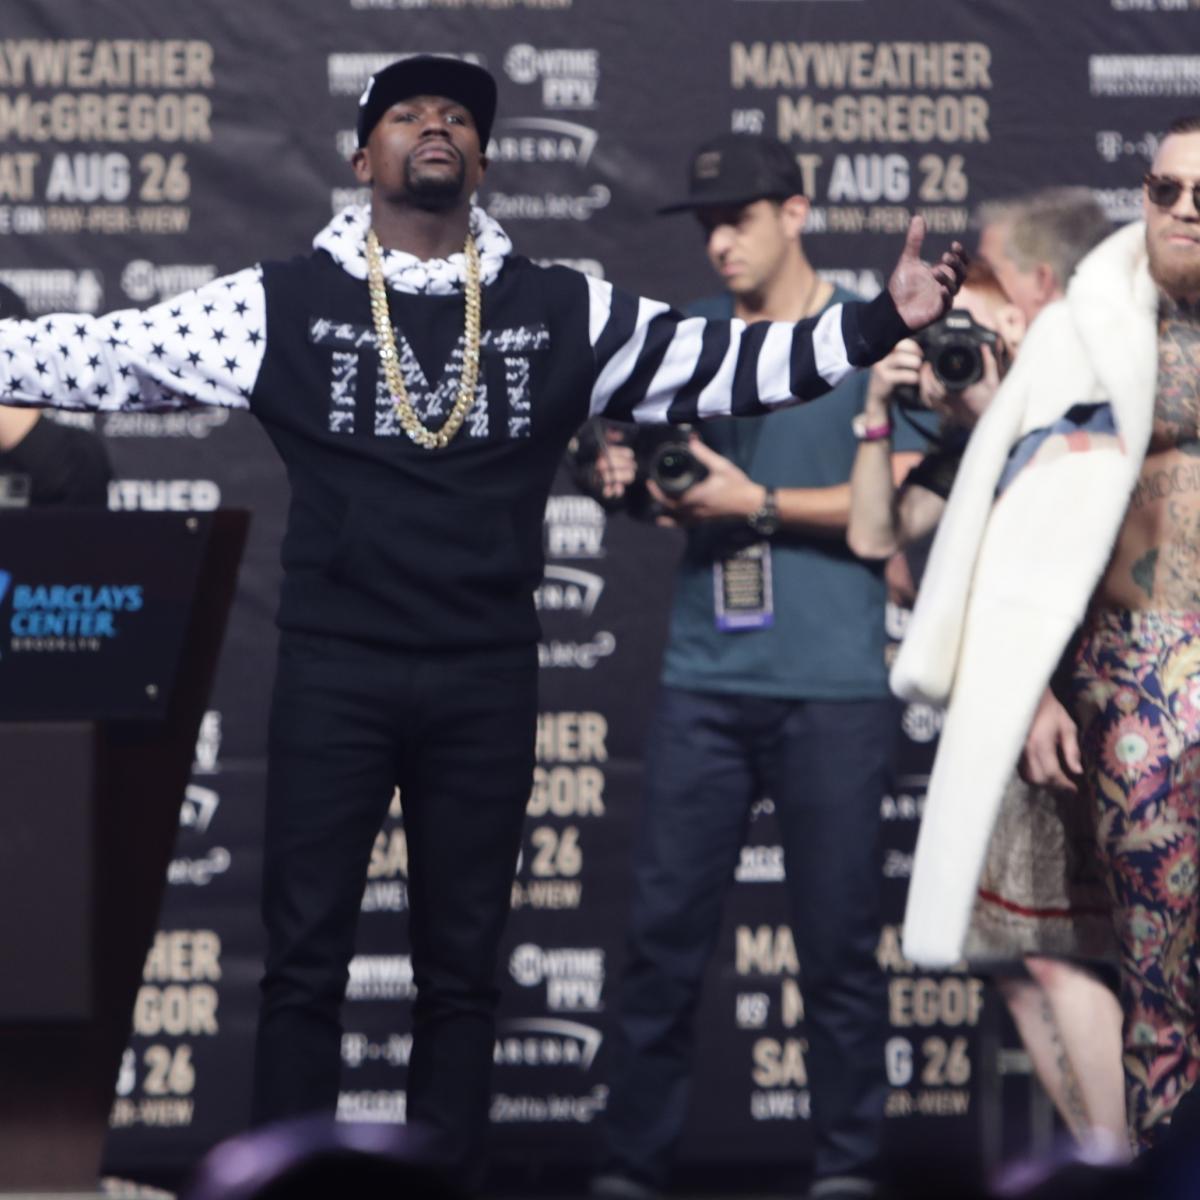 Floyd Mayweather and Conor McGregor request smaller gloves for